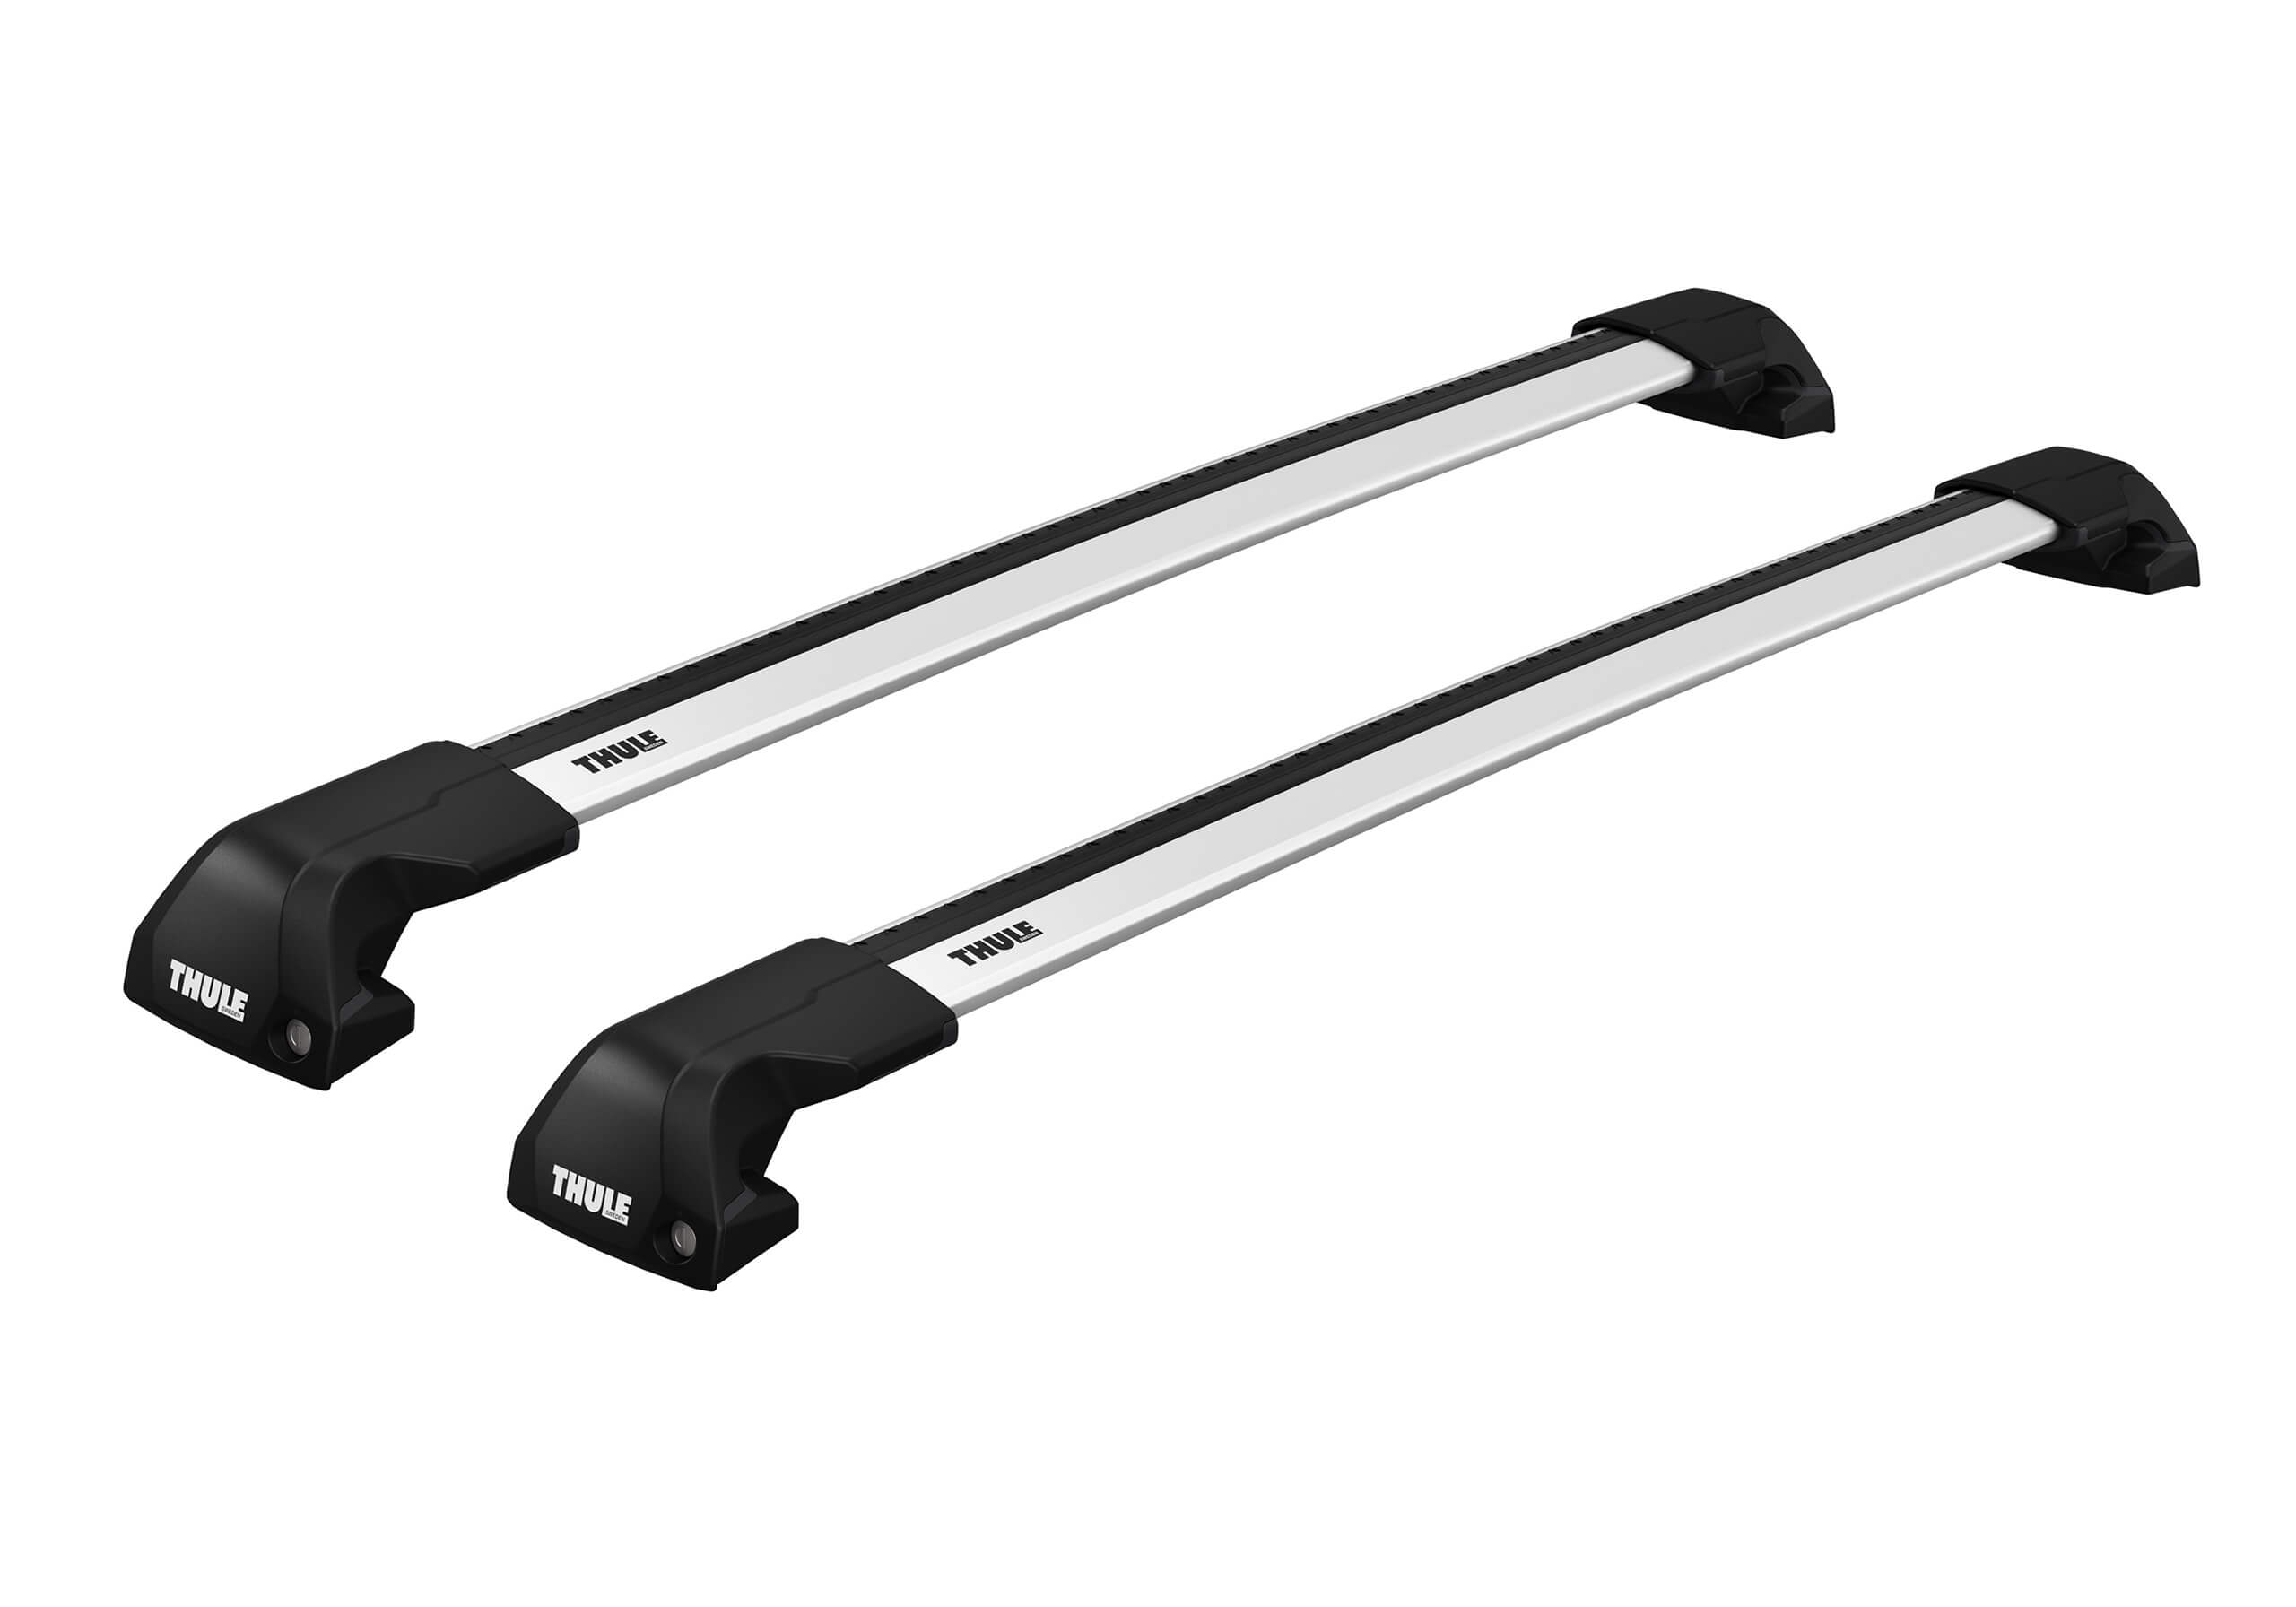 Seat Altea XL (2007 to 2015):Thule Edge silver WingBars package - 7206, 7213, 7212, 6021